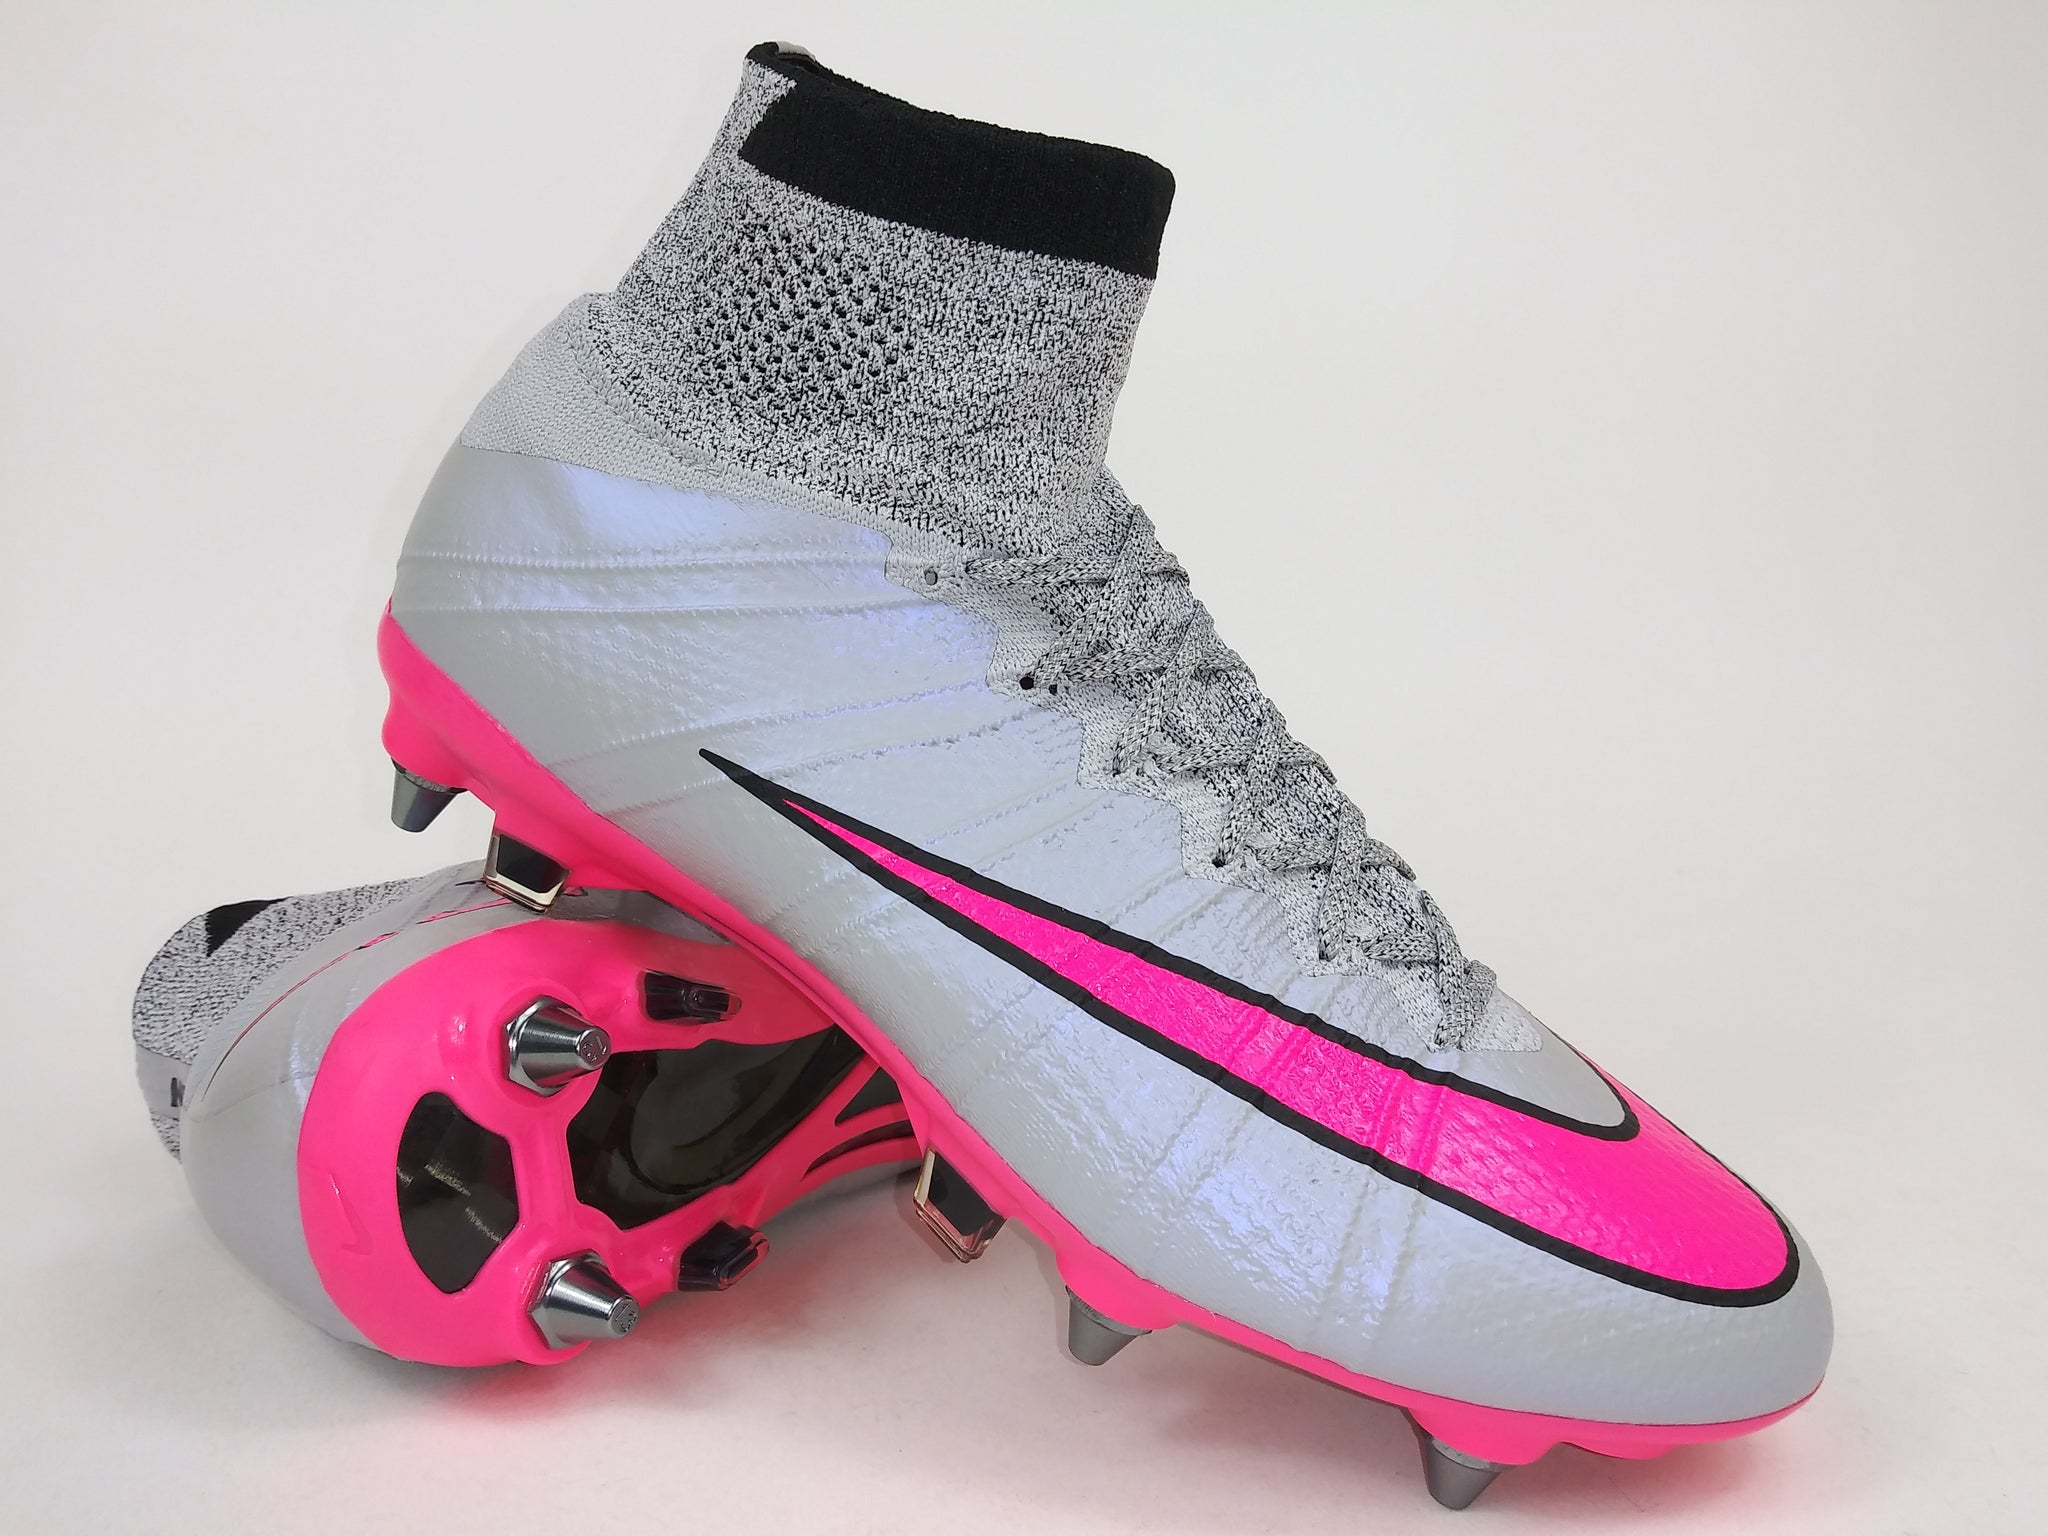 mercurial superfly grey and pink